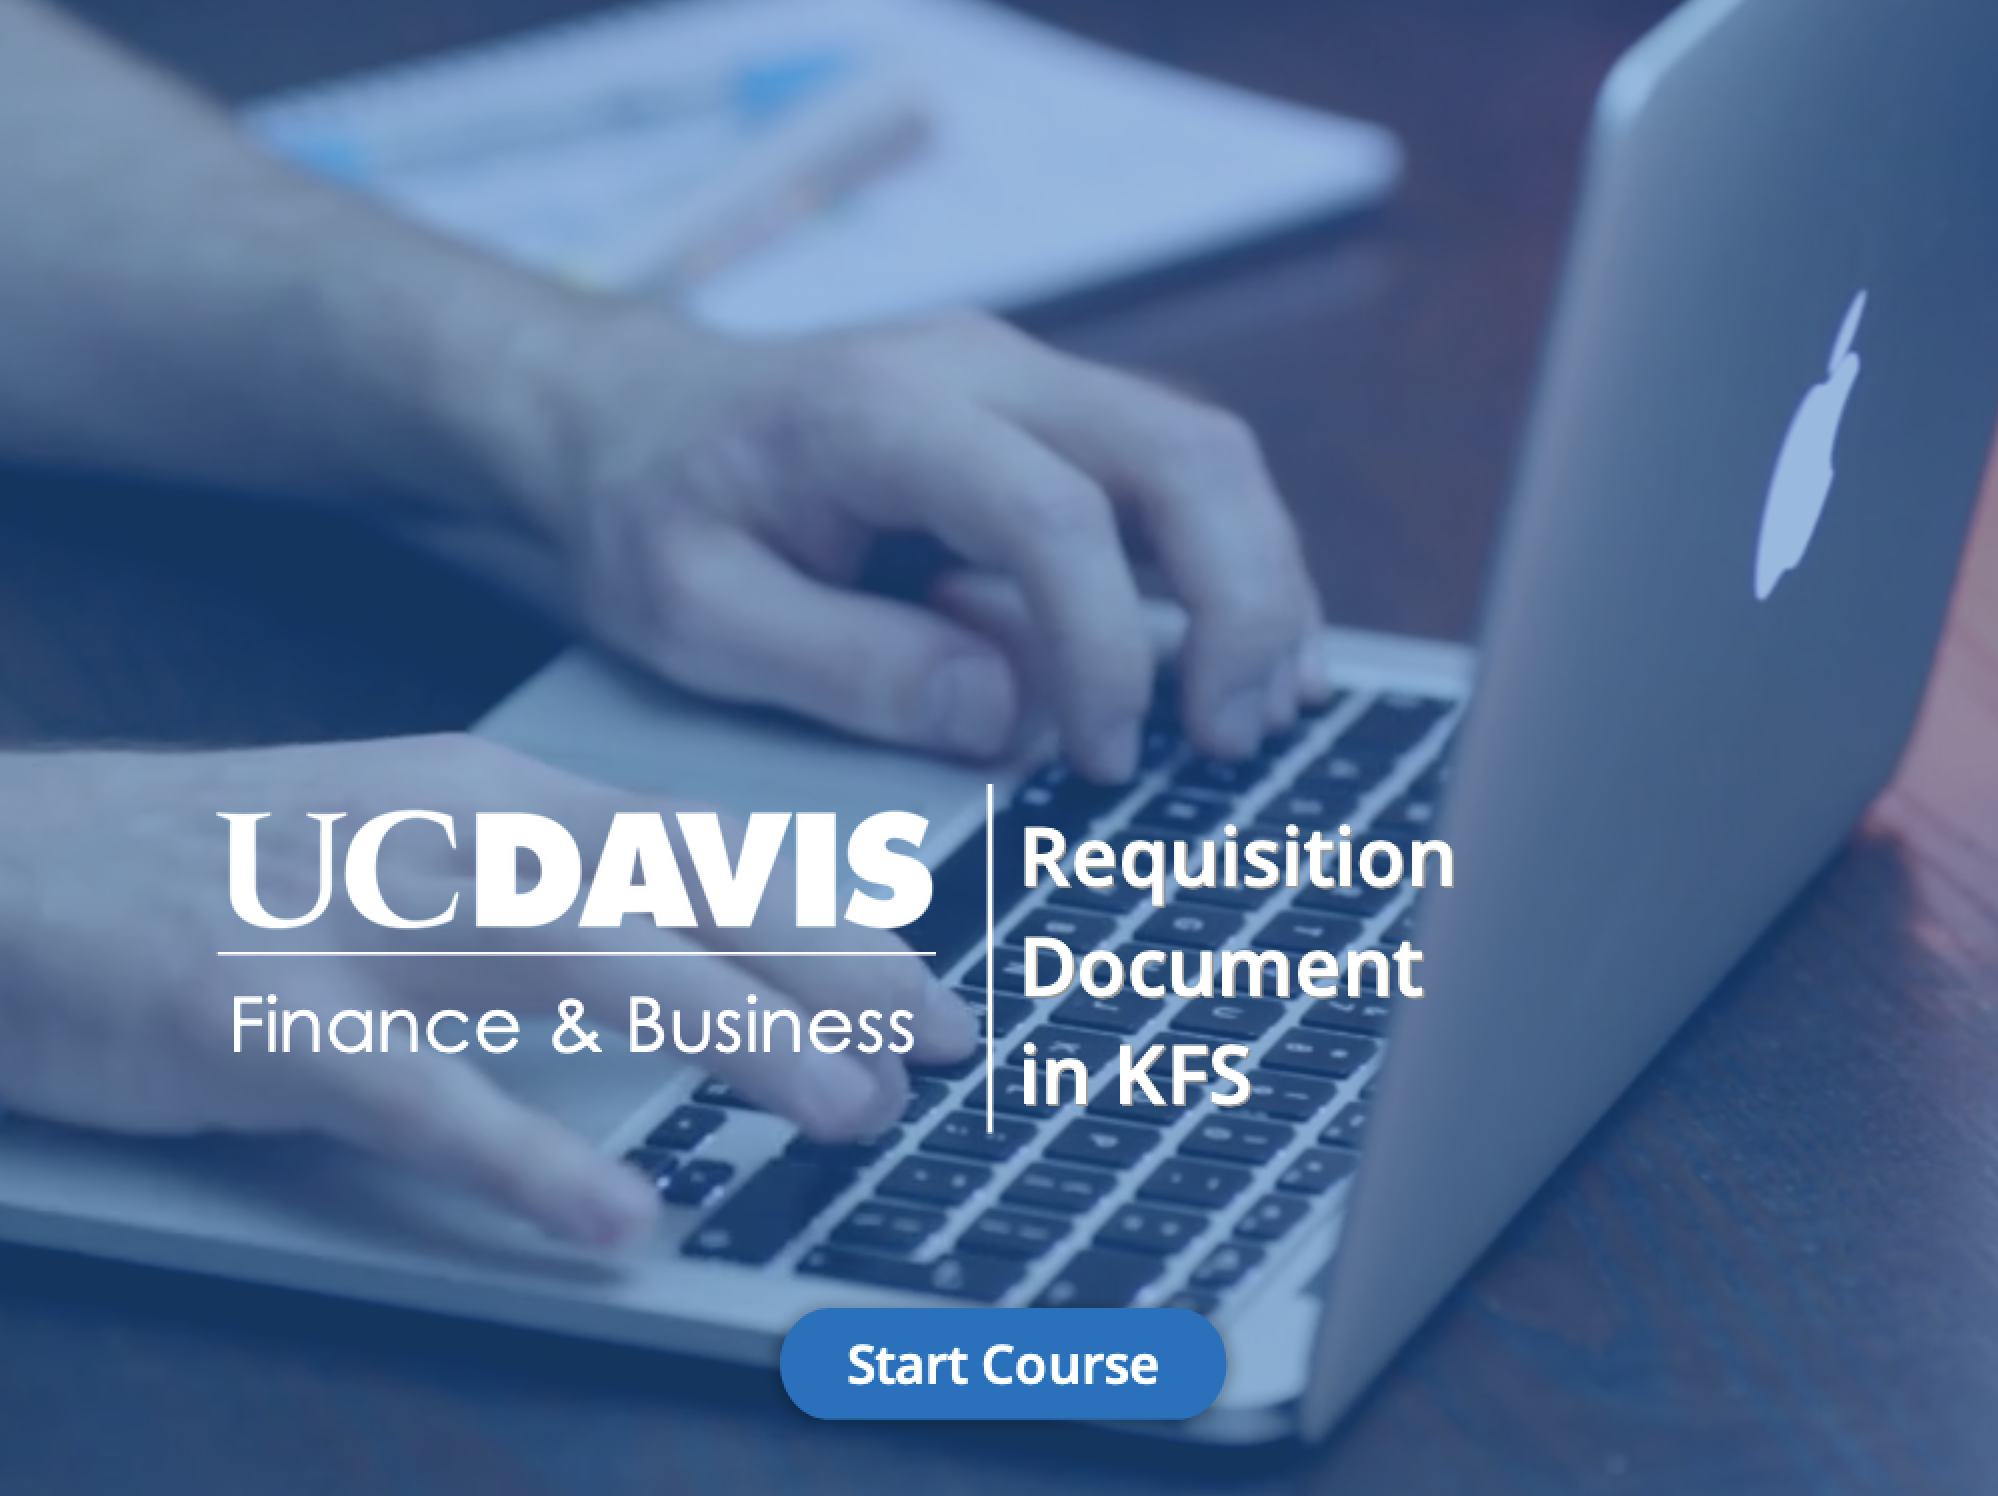 Learn how to complete the Requisition Document for Capital Equipment (EQ) in this 15 minute course.